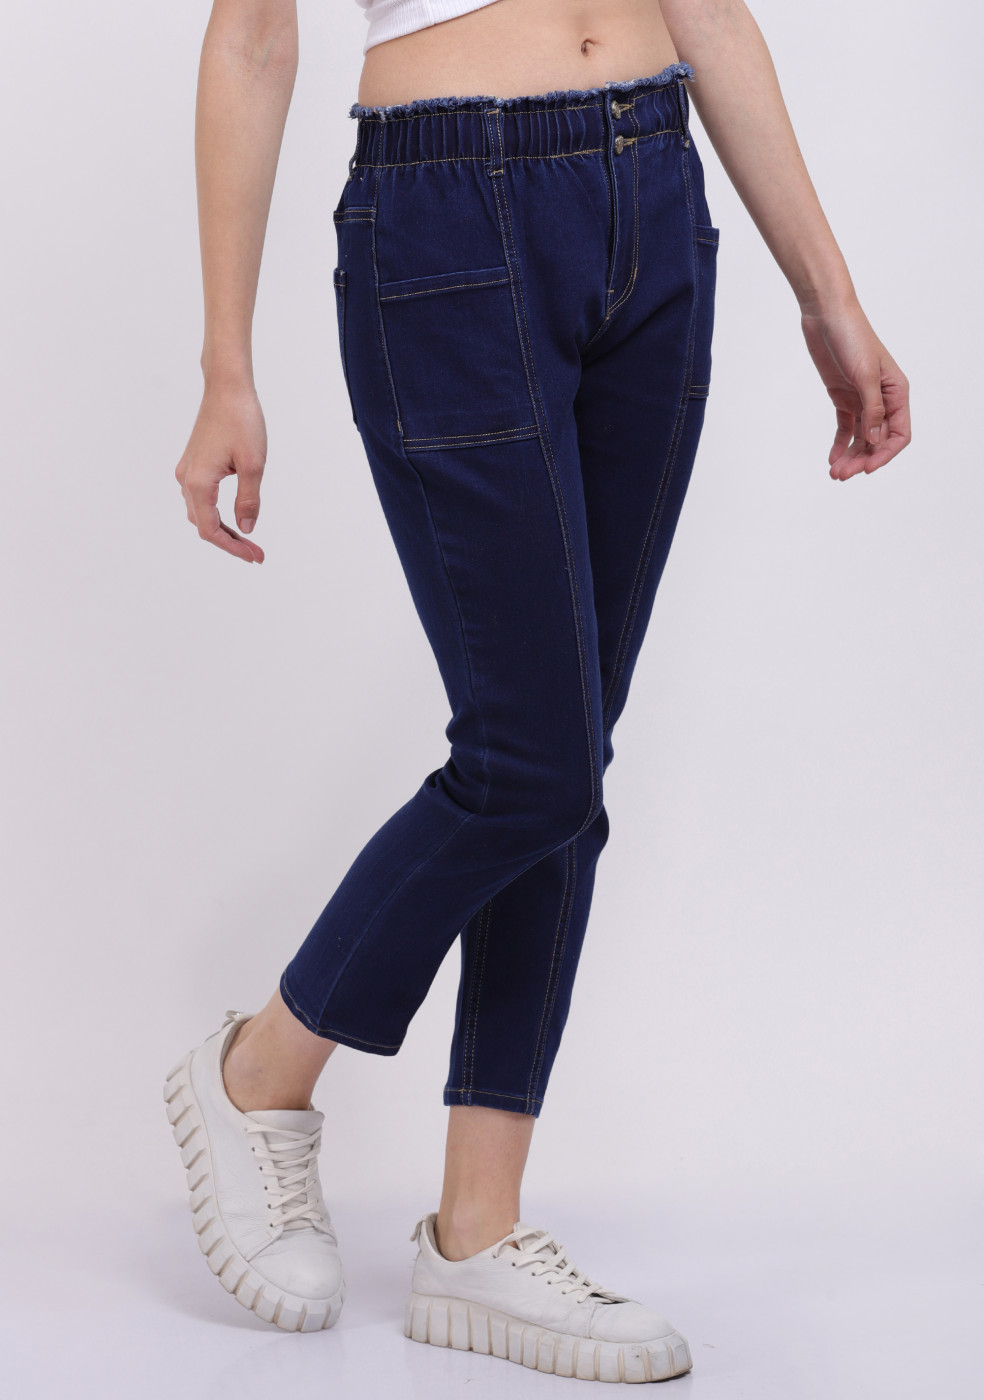 Navy Blue Comfortable Jeans For Women